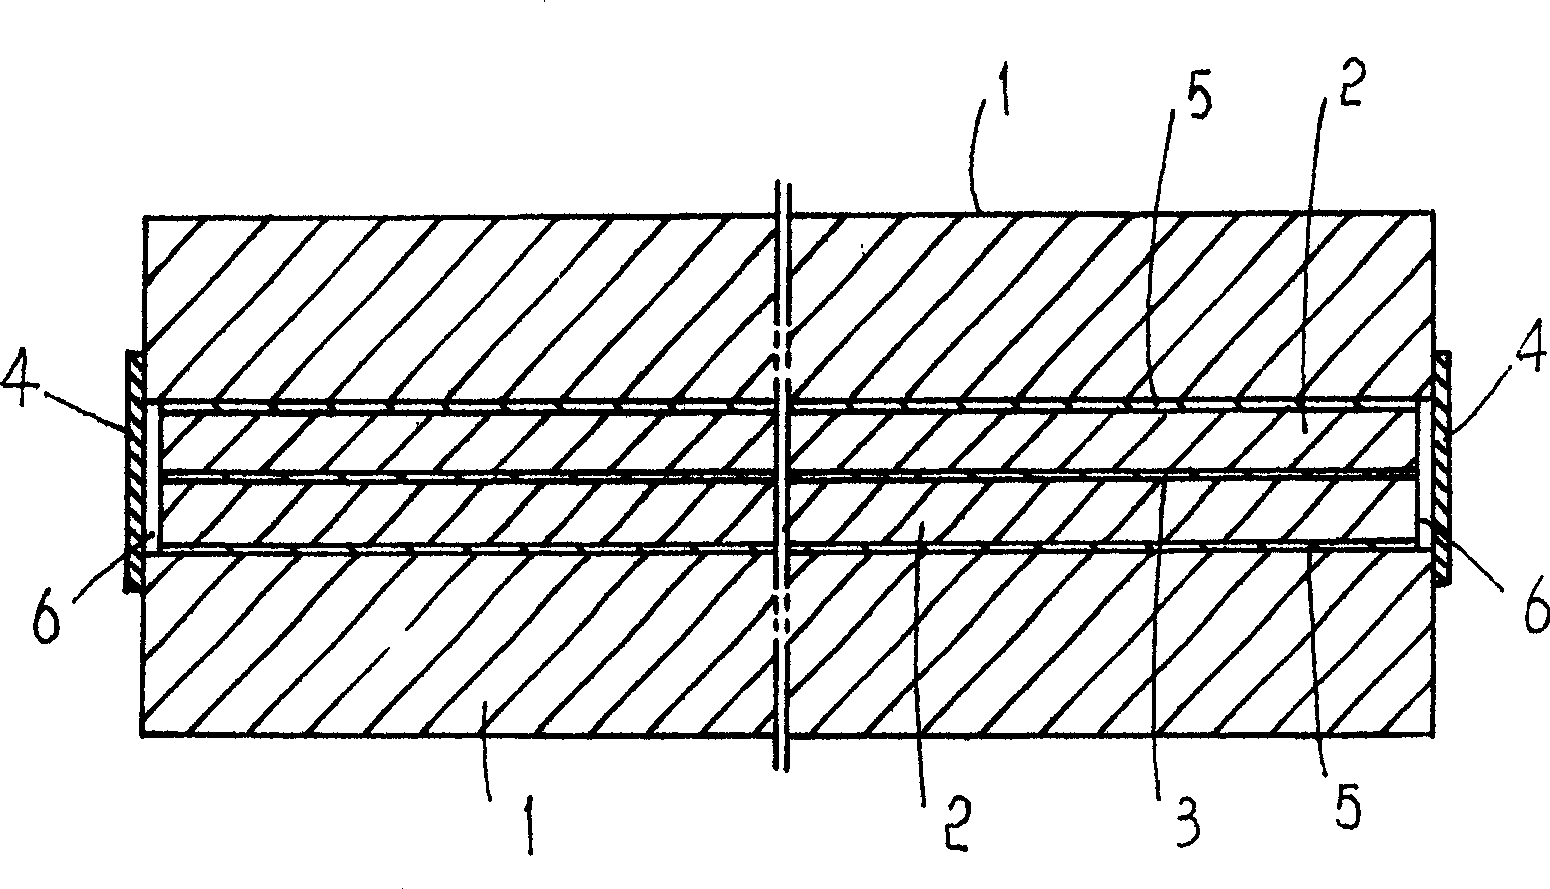 Processing method of press forming soldering high rolling composite blank